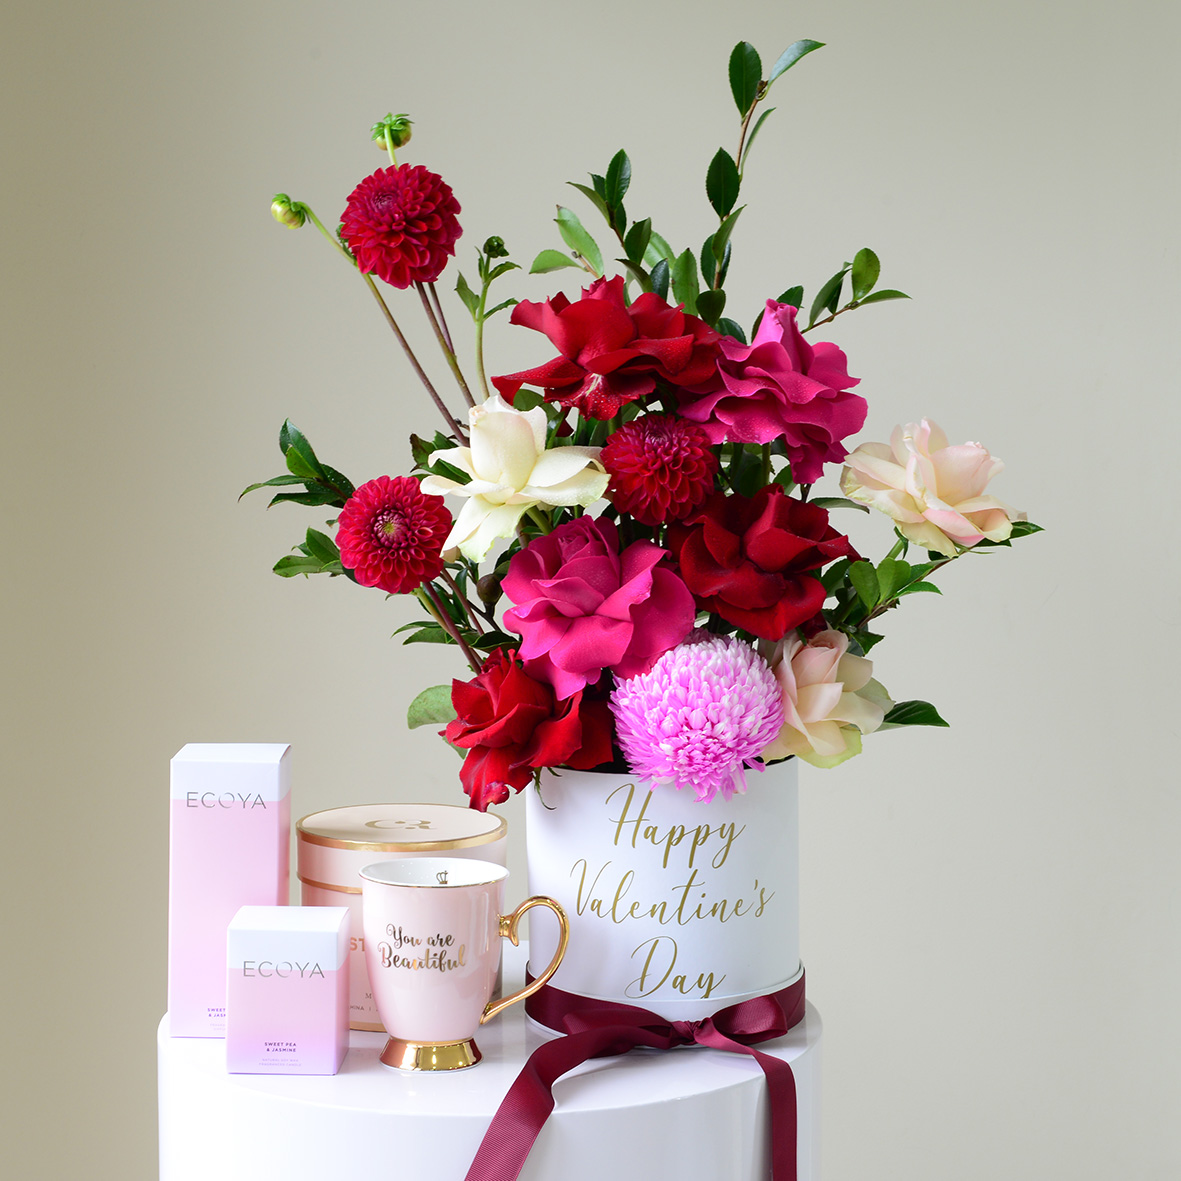 Bloombox - Valentines Day Flower Delivery [SOLD OUT]